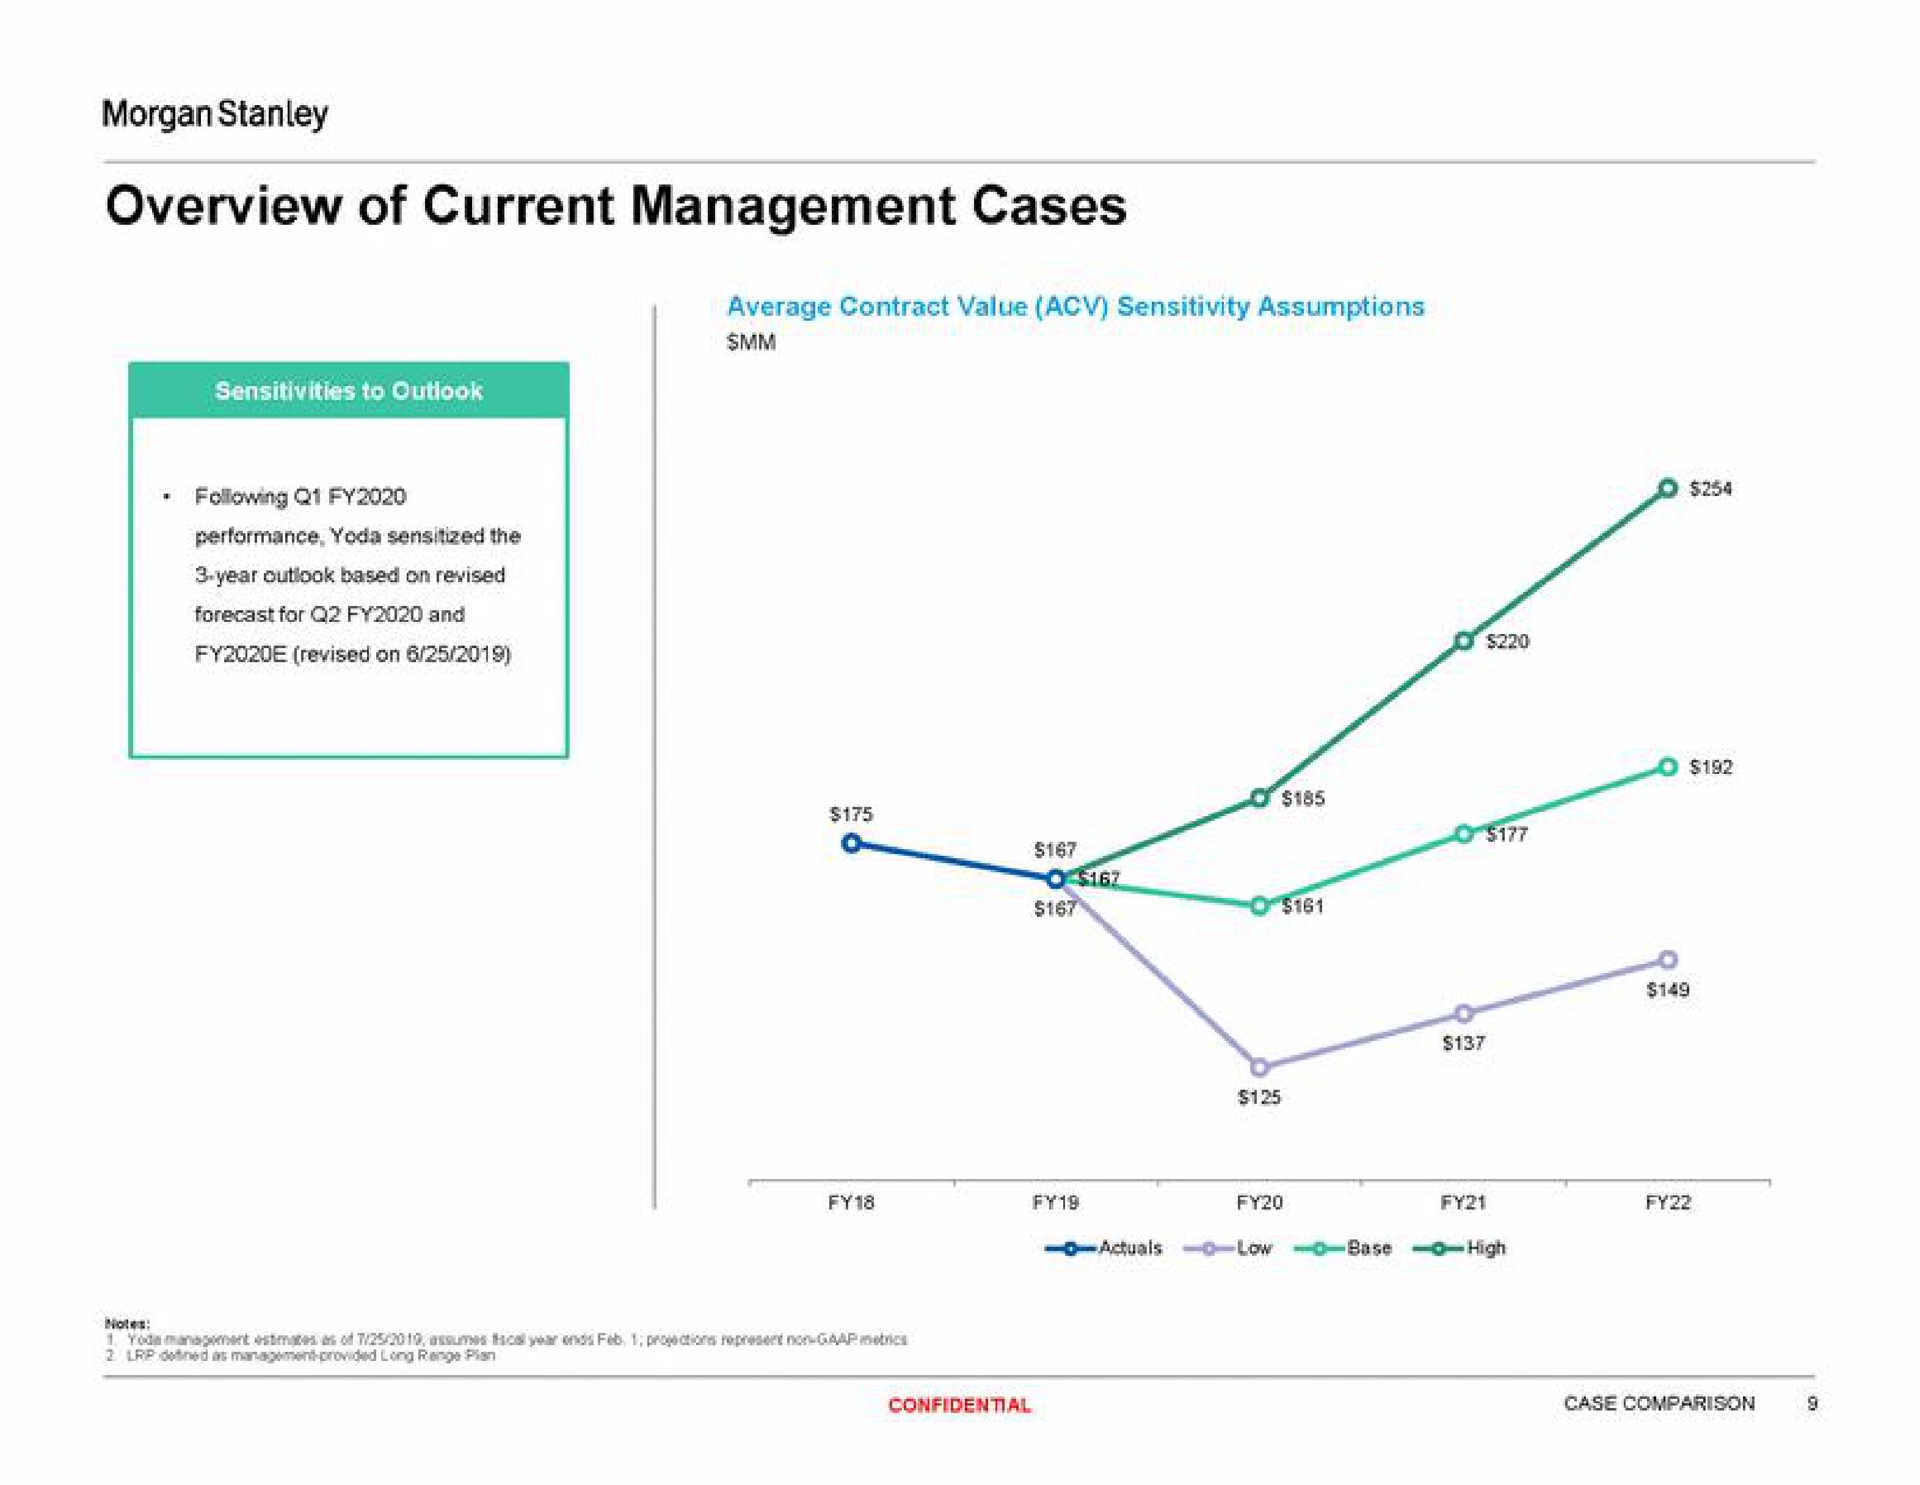 overview of current management cases | Morgan Stanley